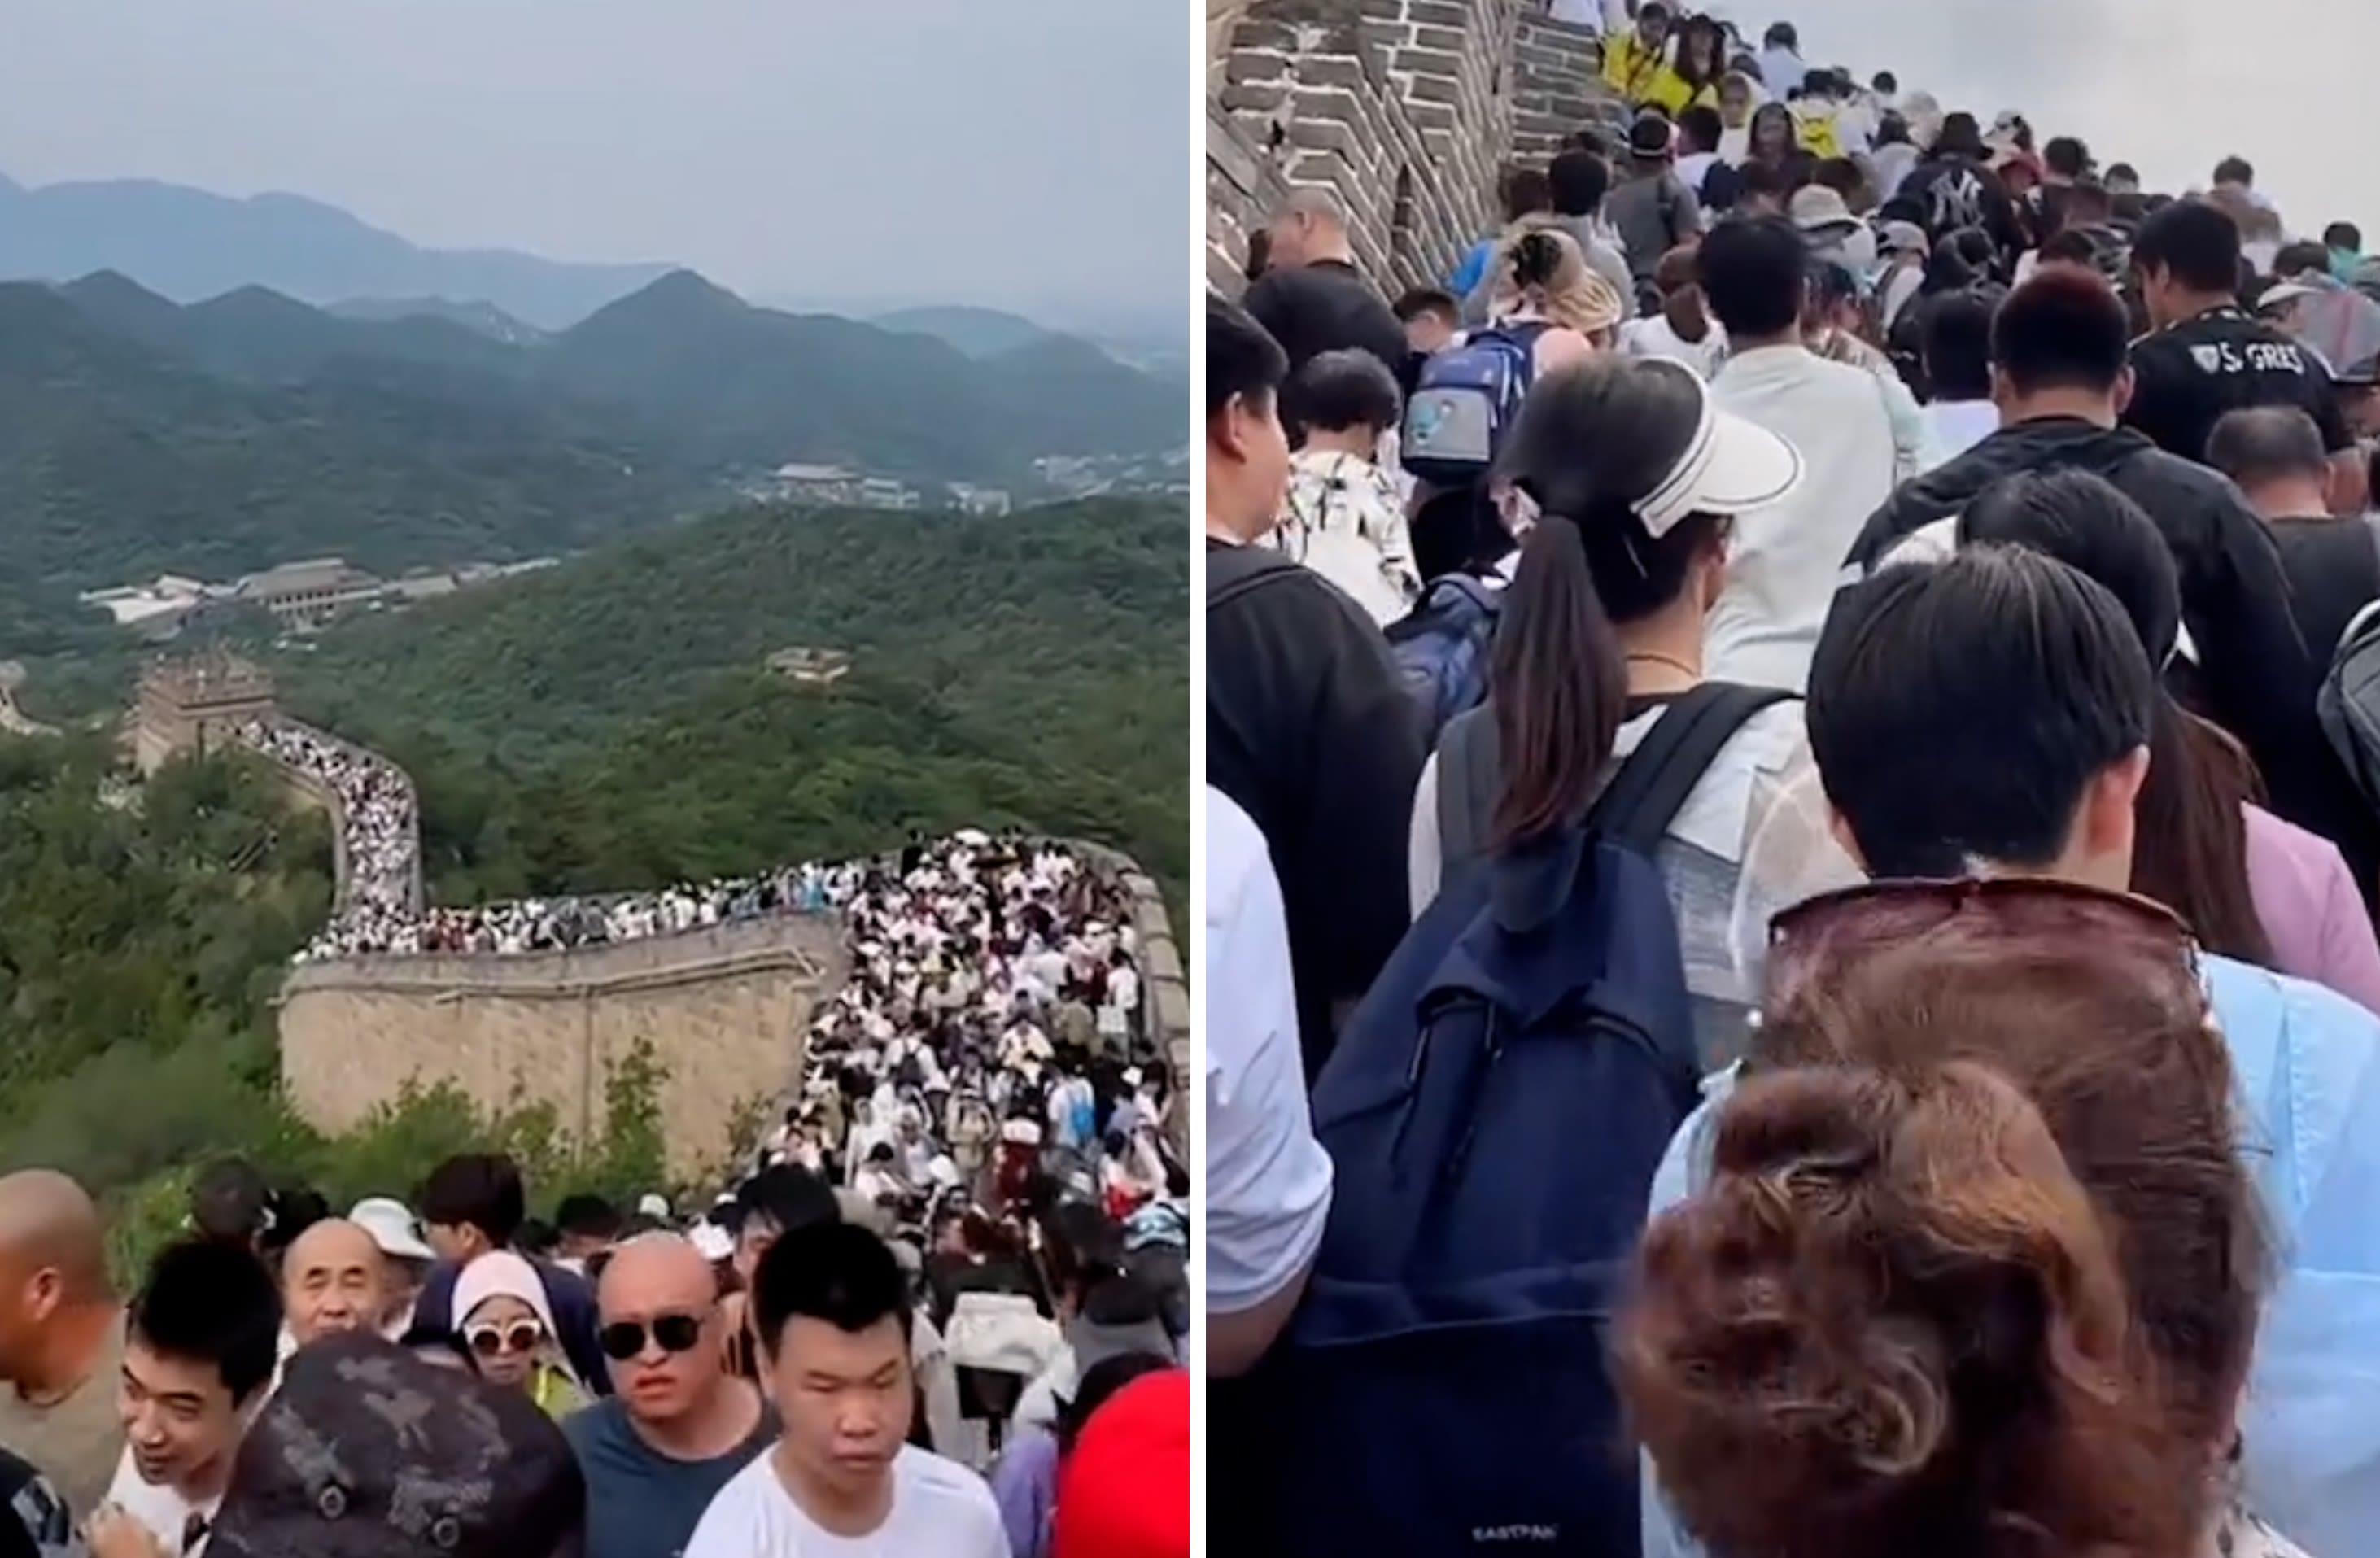 Ancient wonder of the world overrun by tourists in viral video